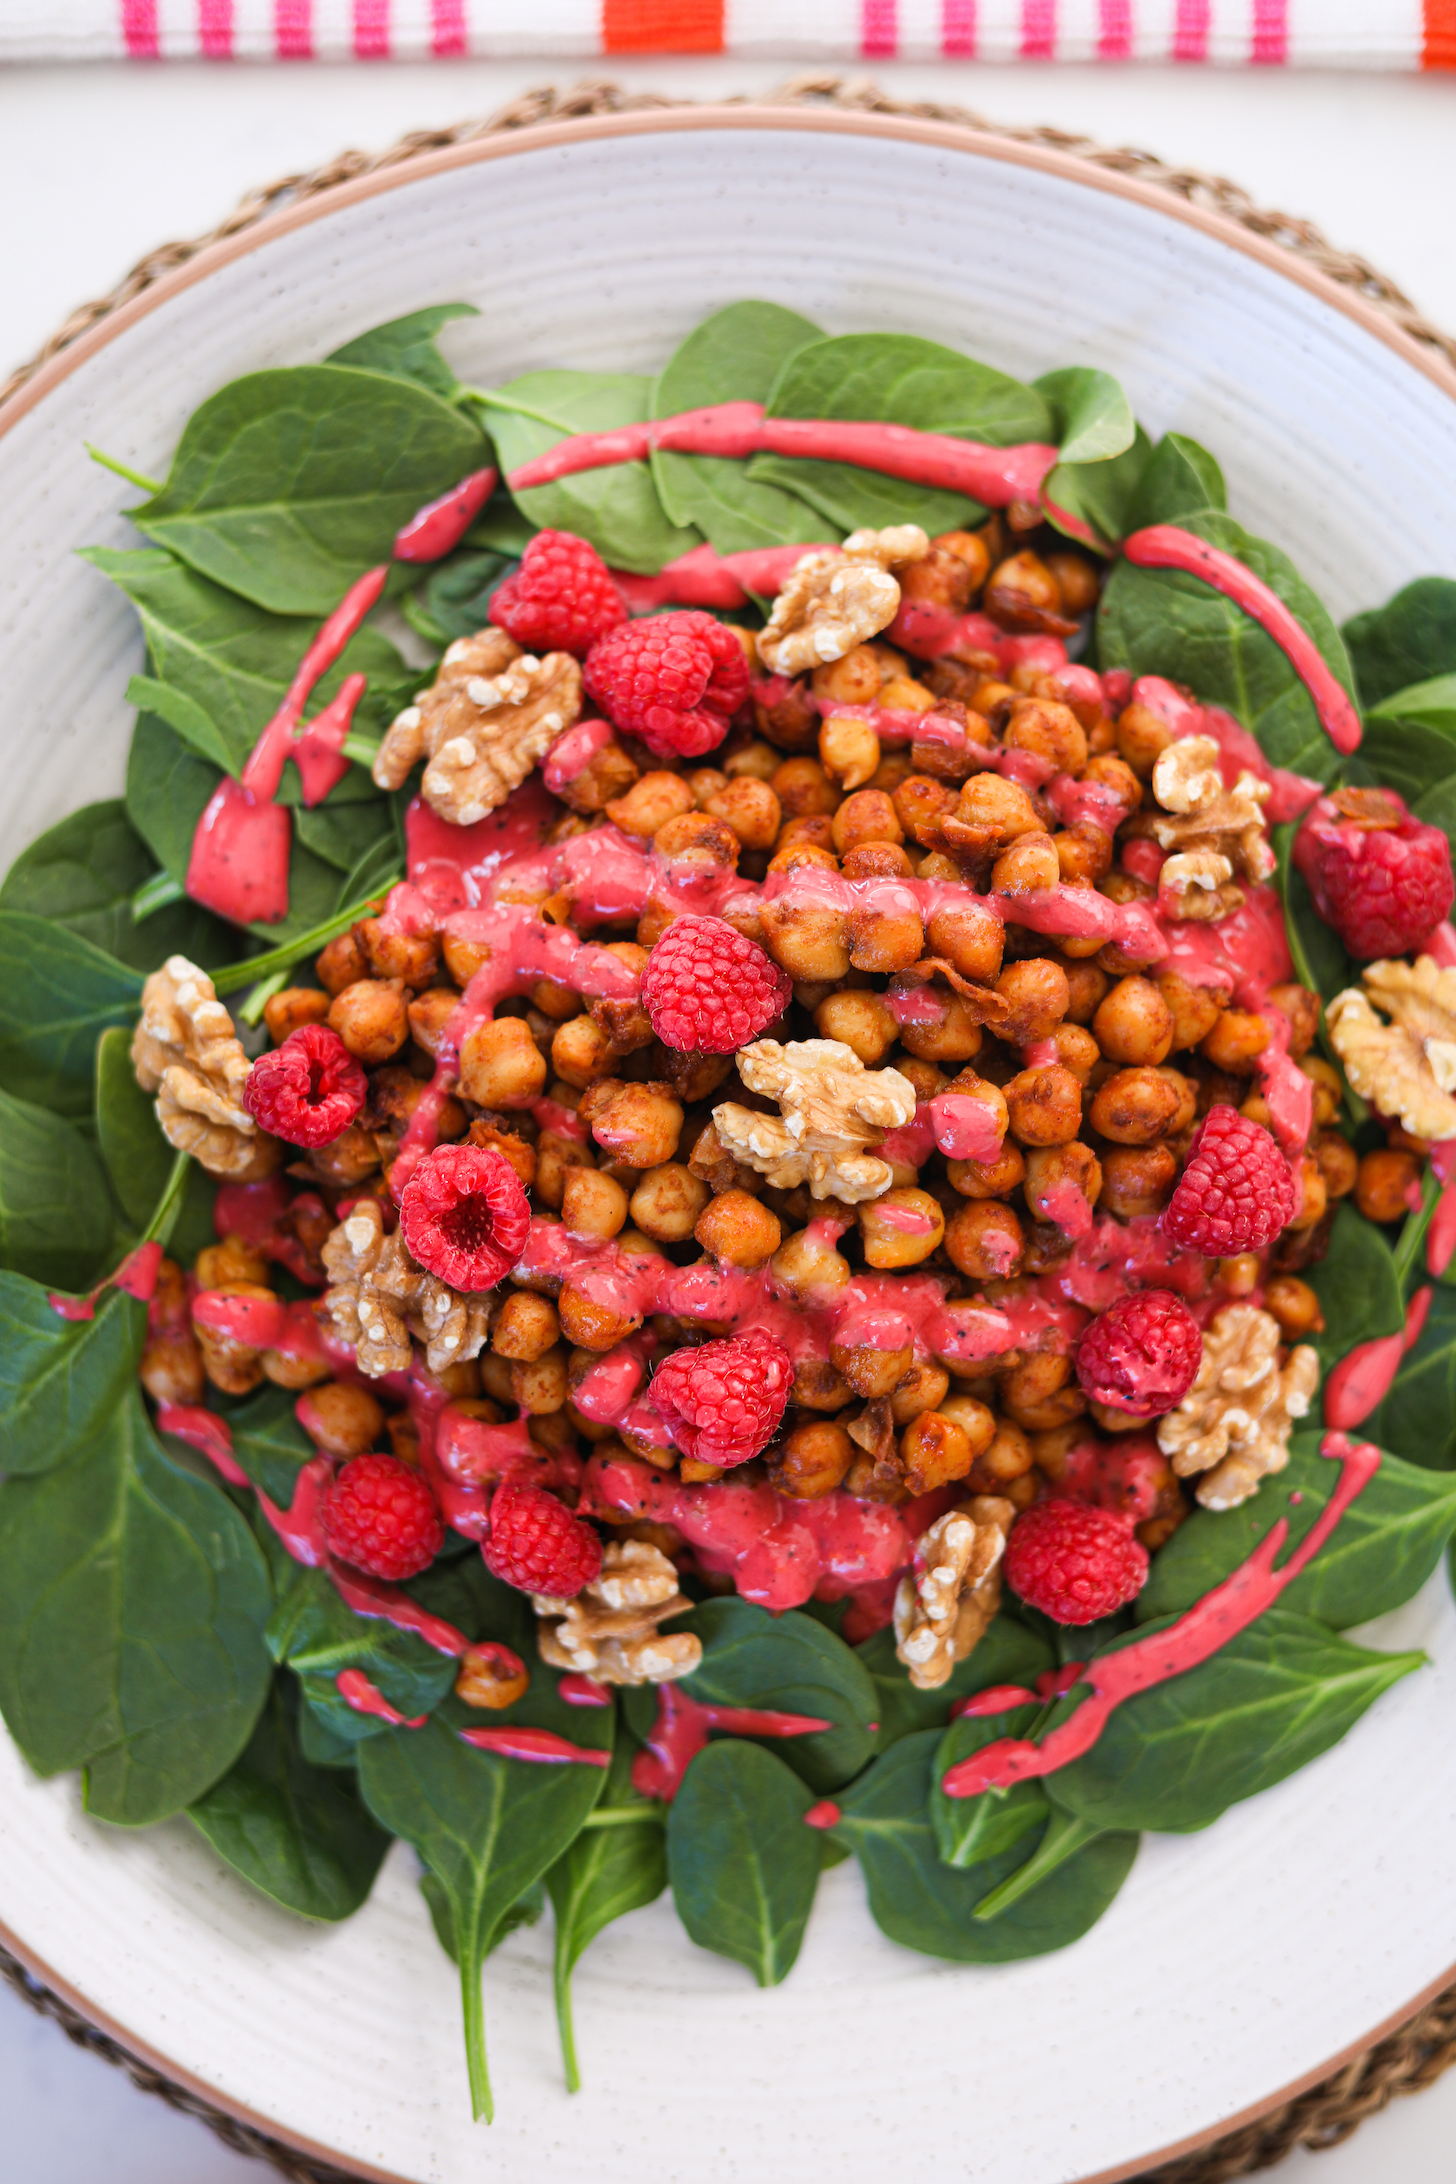 Flat lay of a plate of chickpeas on a bed of spinach topped with raspberries, walnuts and a red dressing.